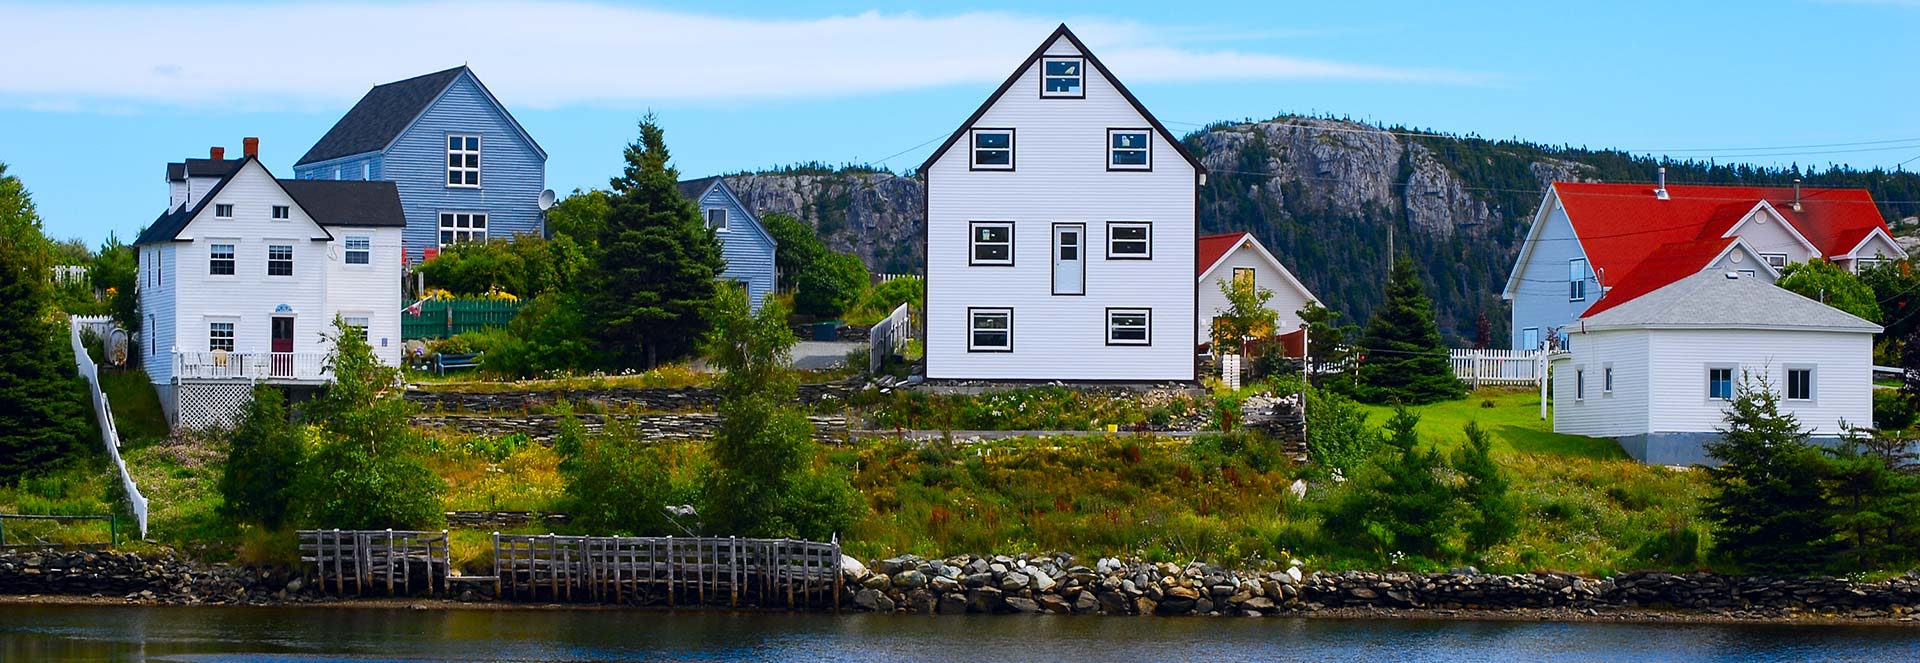 81-83 Hughs Pond Road, Portugal-Cove – St. Philips